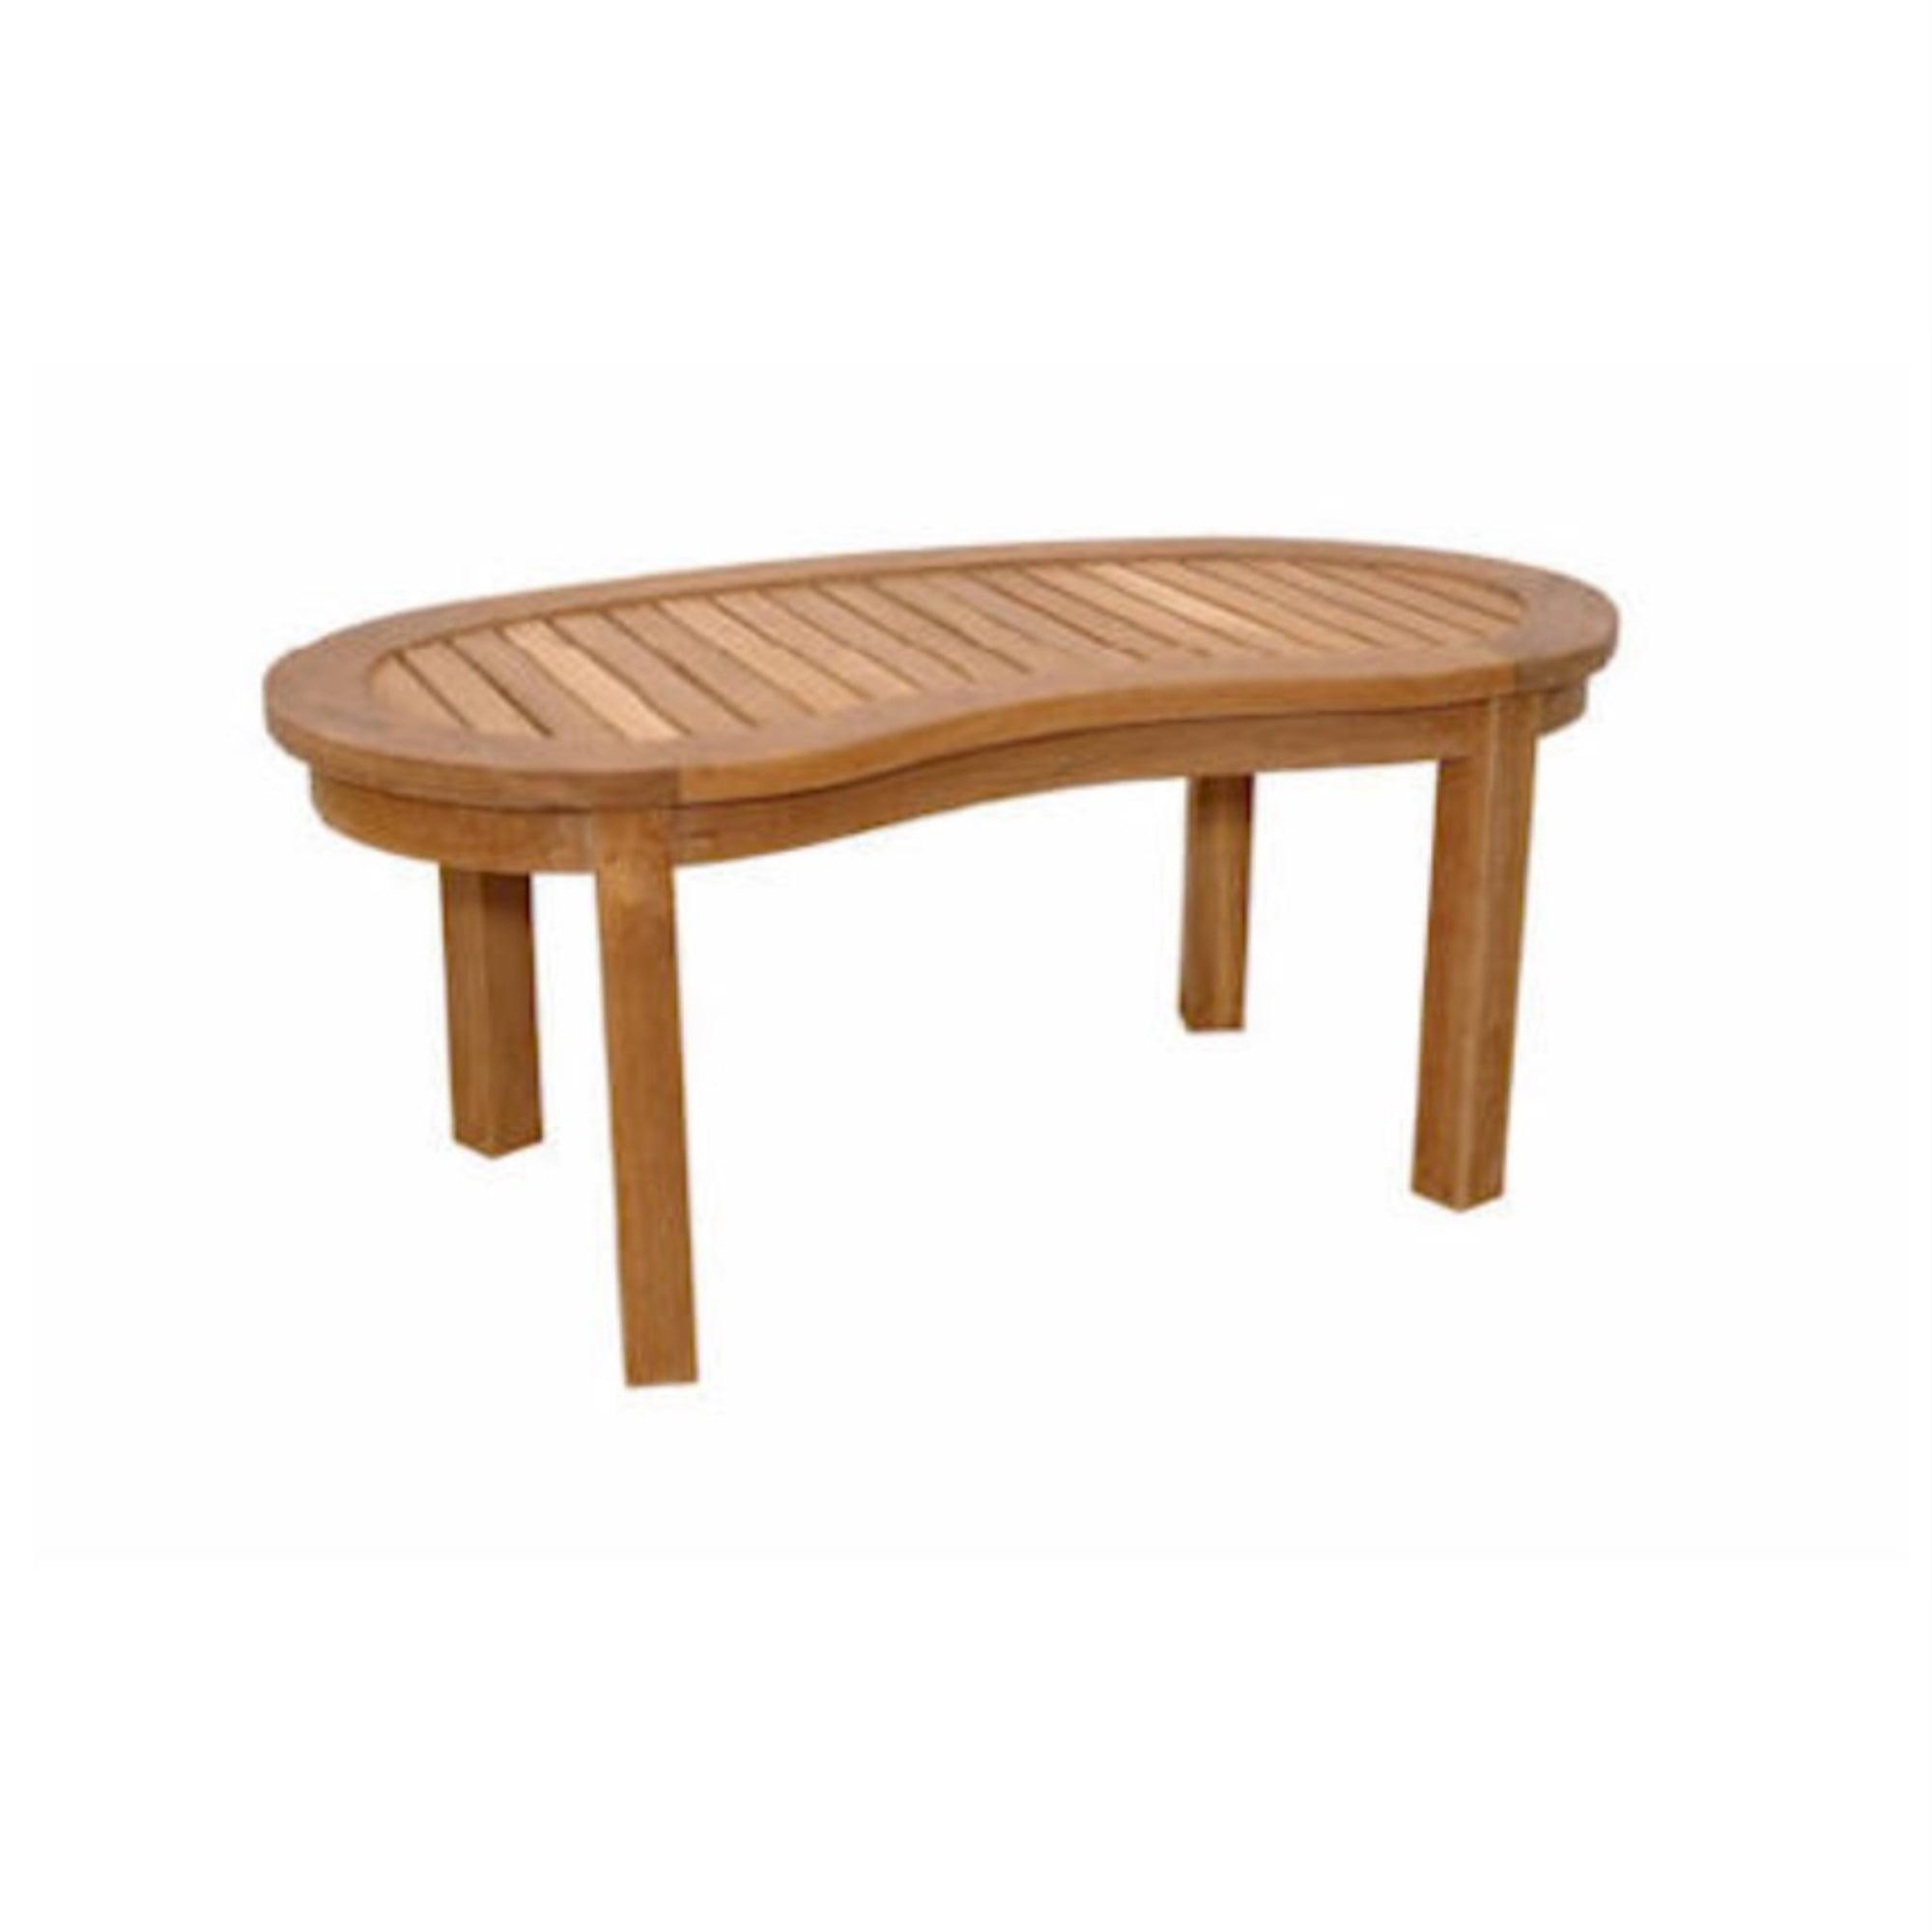 Natural Finish Solid Teak Kidney-Shaped Outdoor Coffee Table